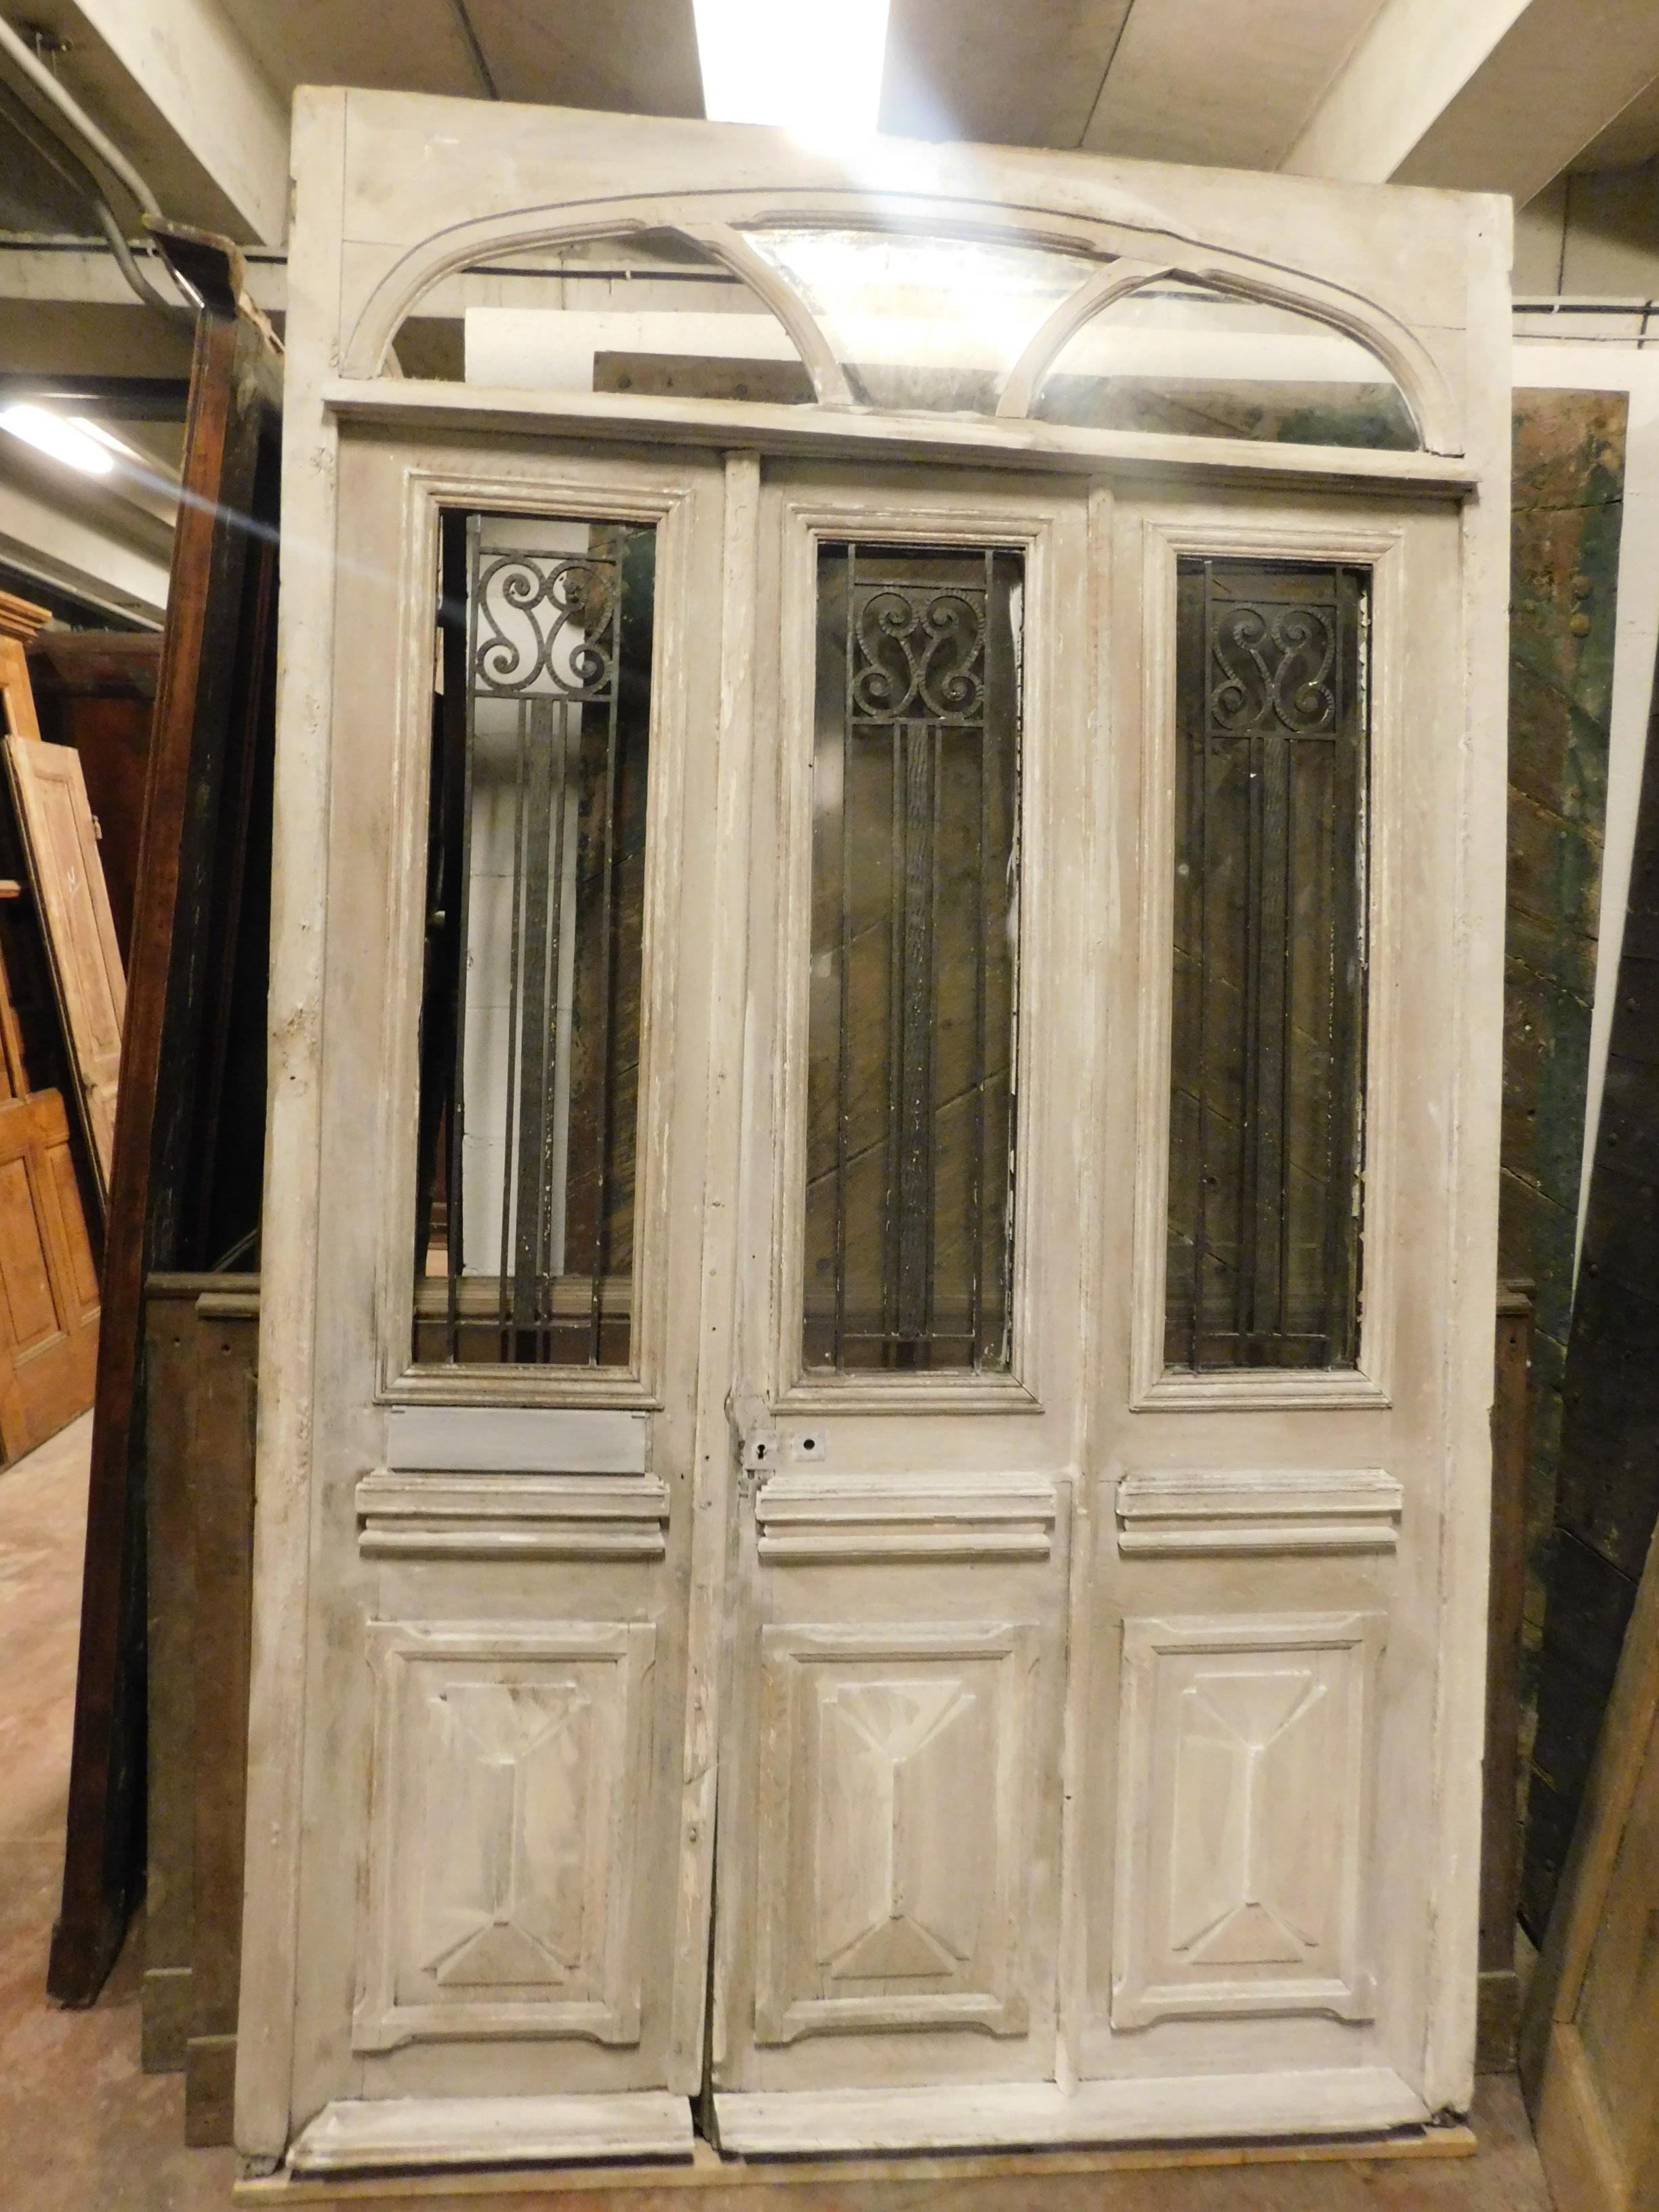 Ancient oak shop door, built for an Italian shop of the 19th century, typical local shop, with irons worked in the glass part and still preserves the letterbox mounted in the 1900s.
Carved at the bottom, it is beautiful on both sides because it